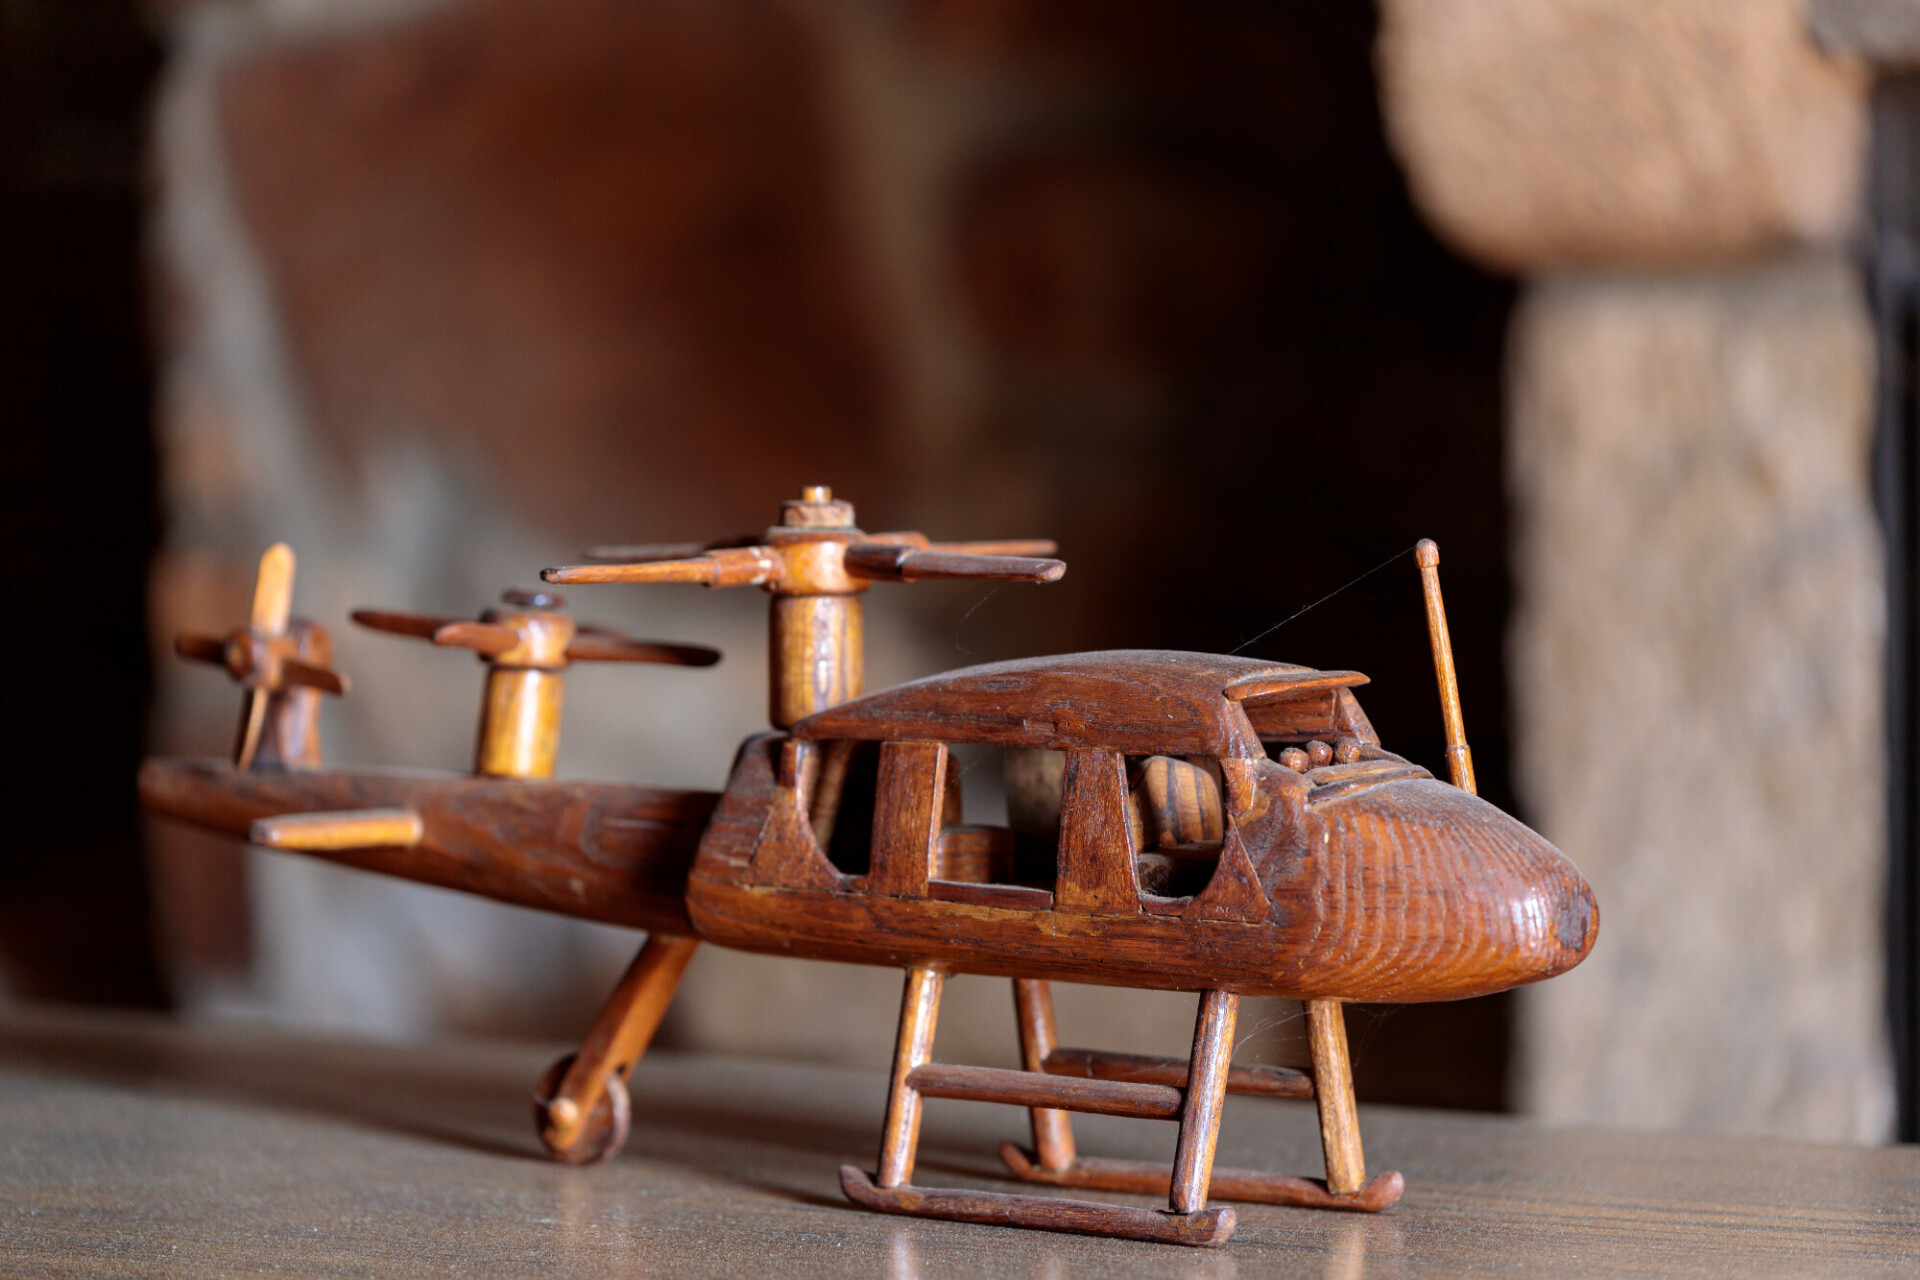 Vintage Delight: Antique Wooden Toy Helicopter